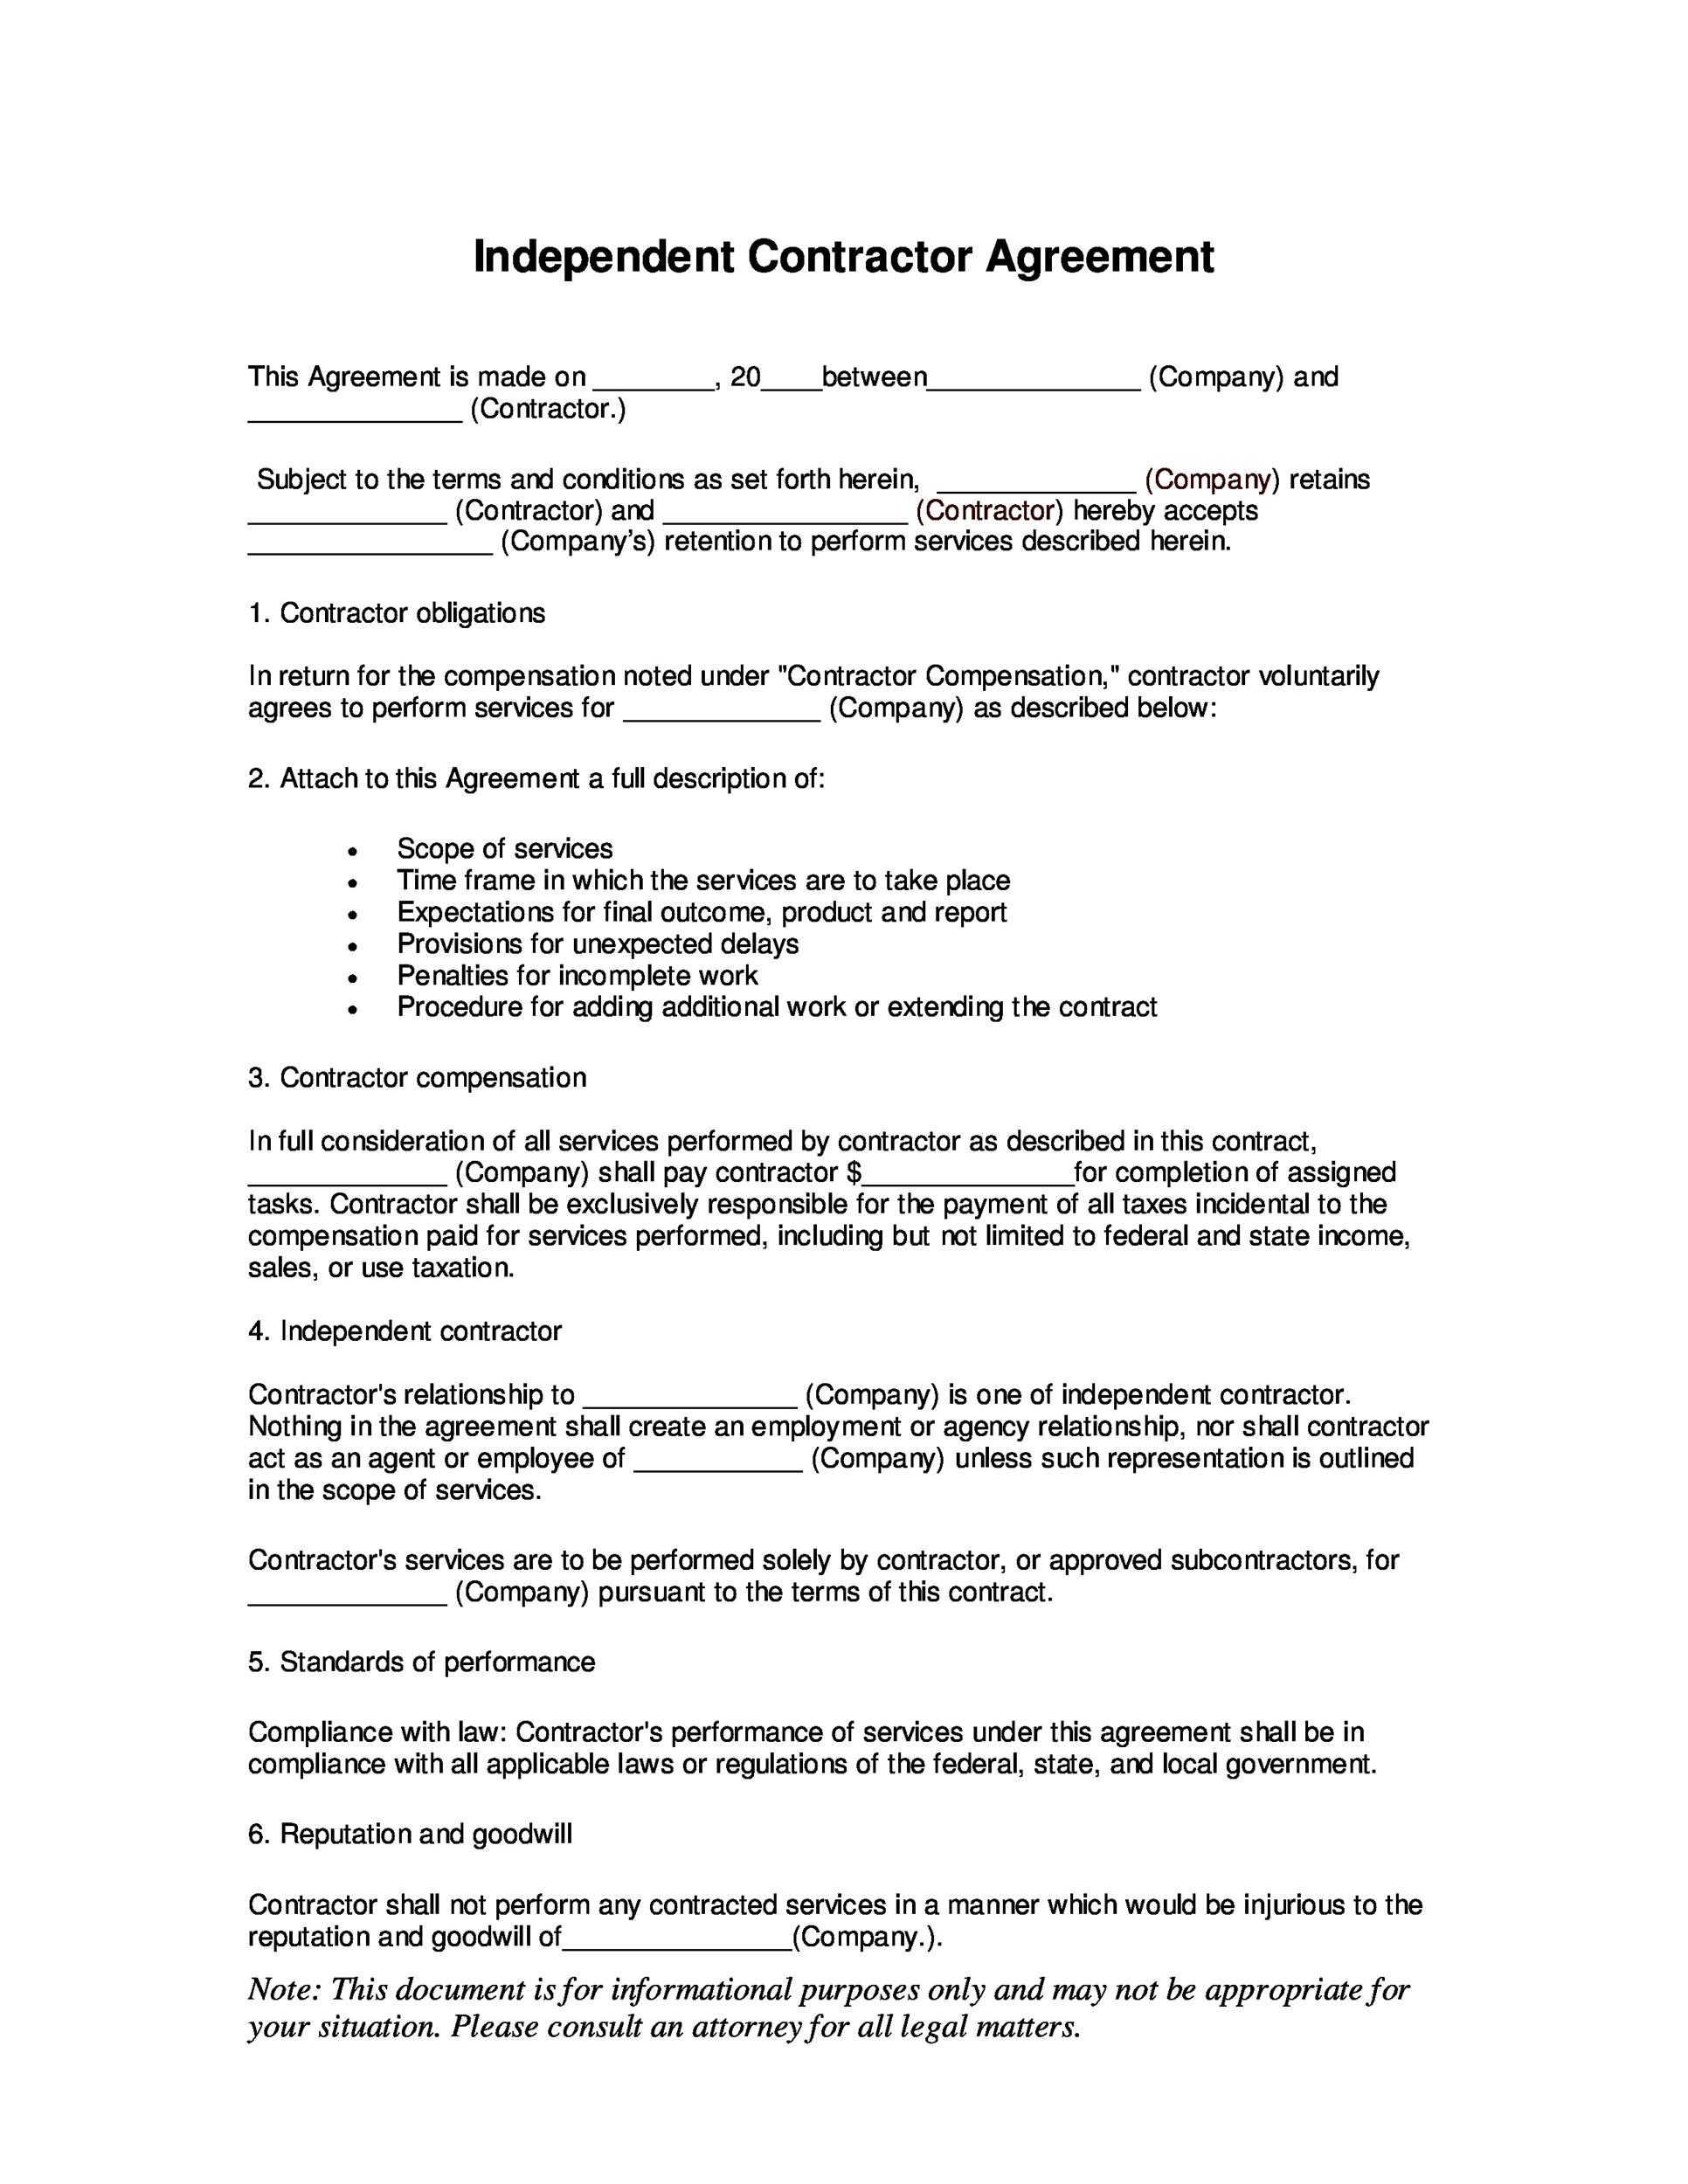 Free independent contractor agreement 36